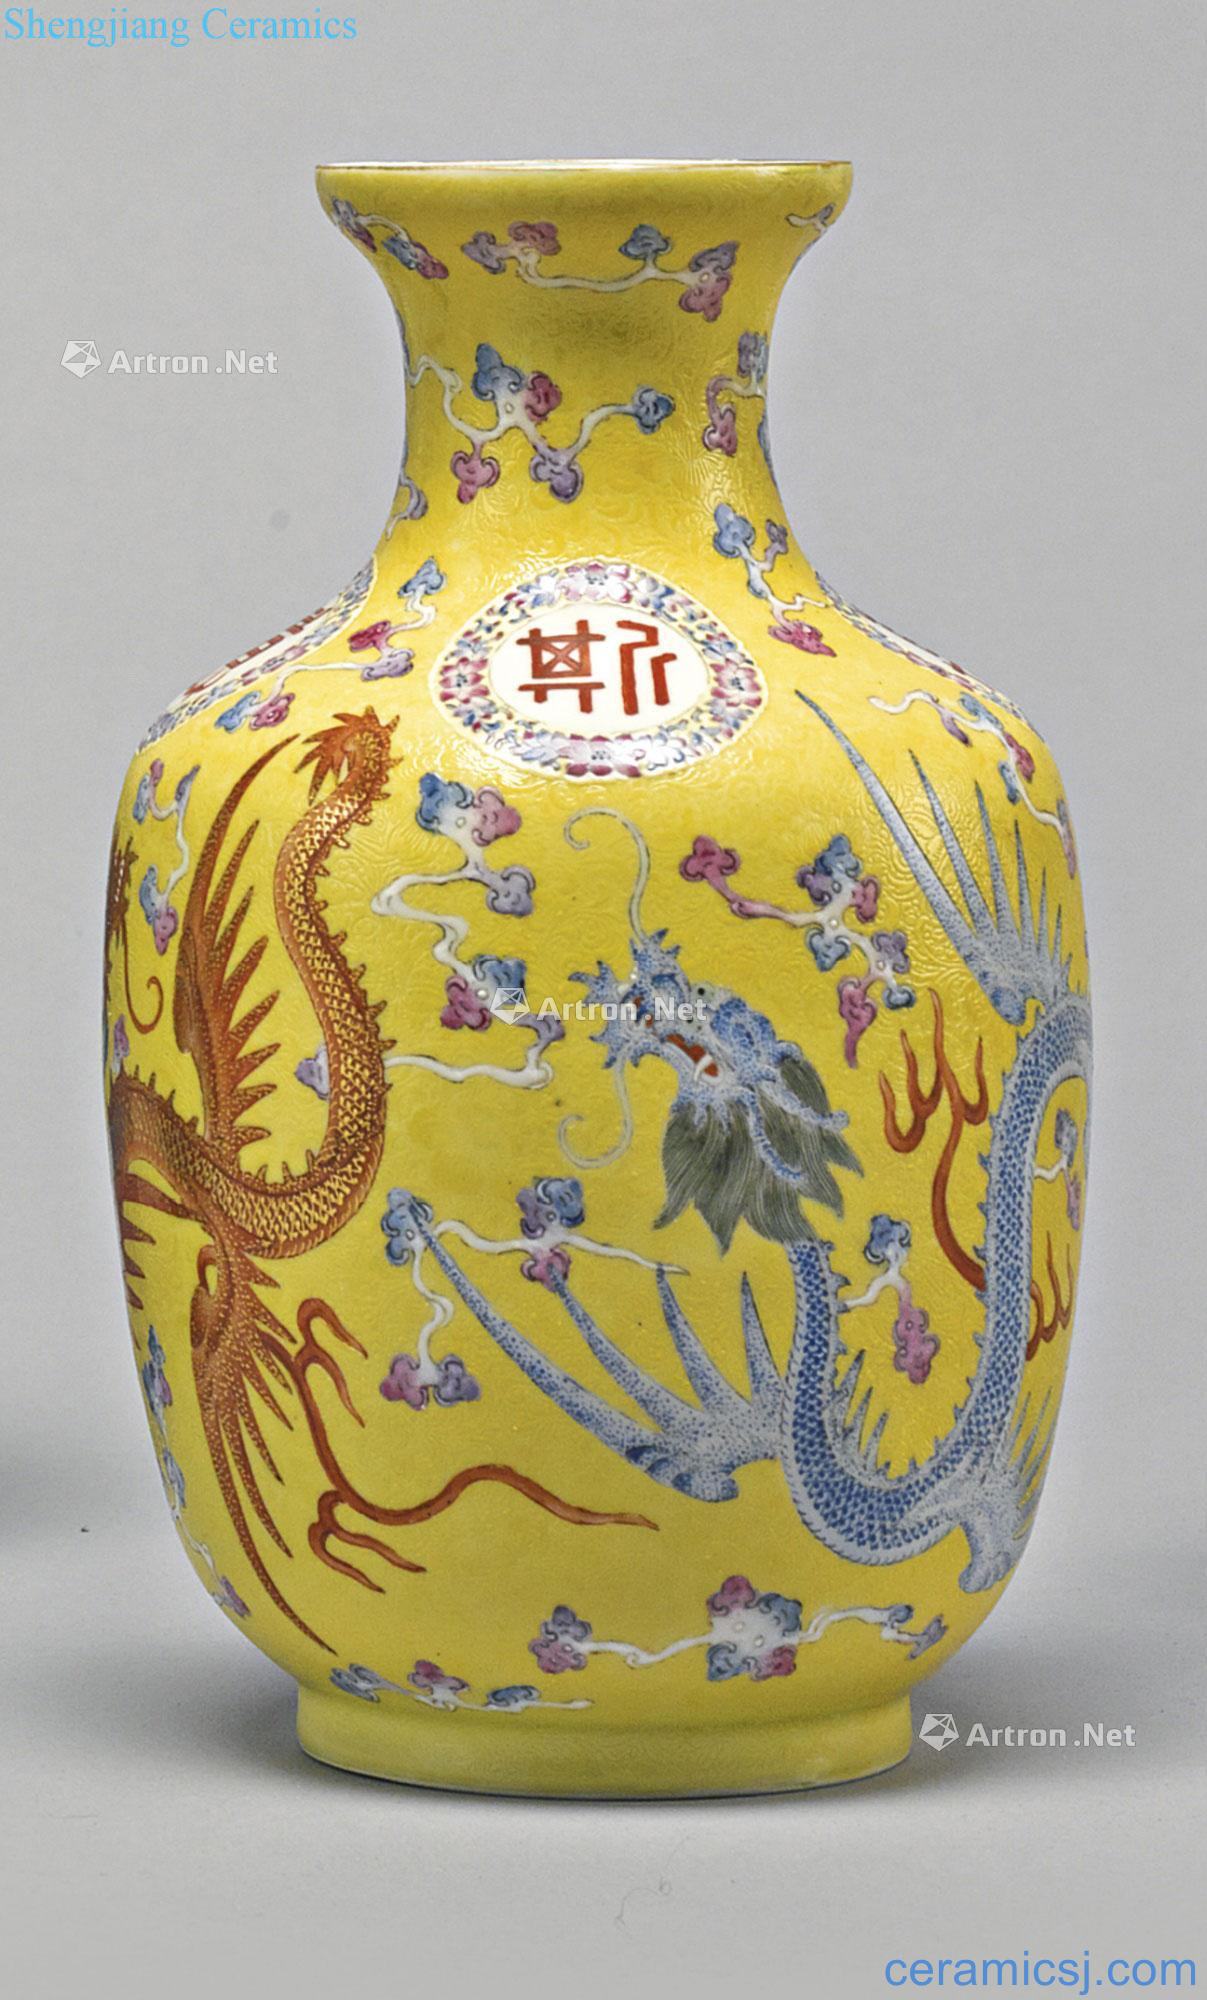 Republic of China, pastel yellow to plunge into the "eternity" dragon grain bottle